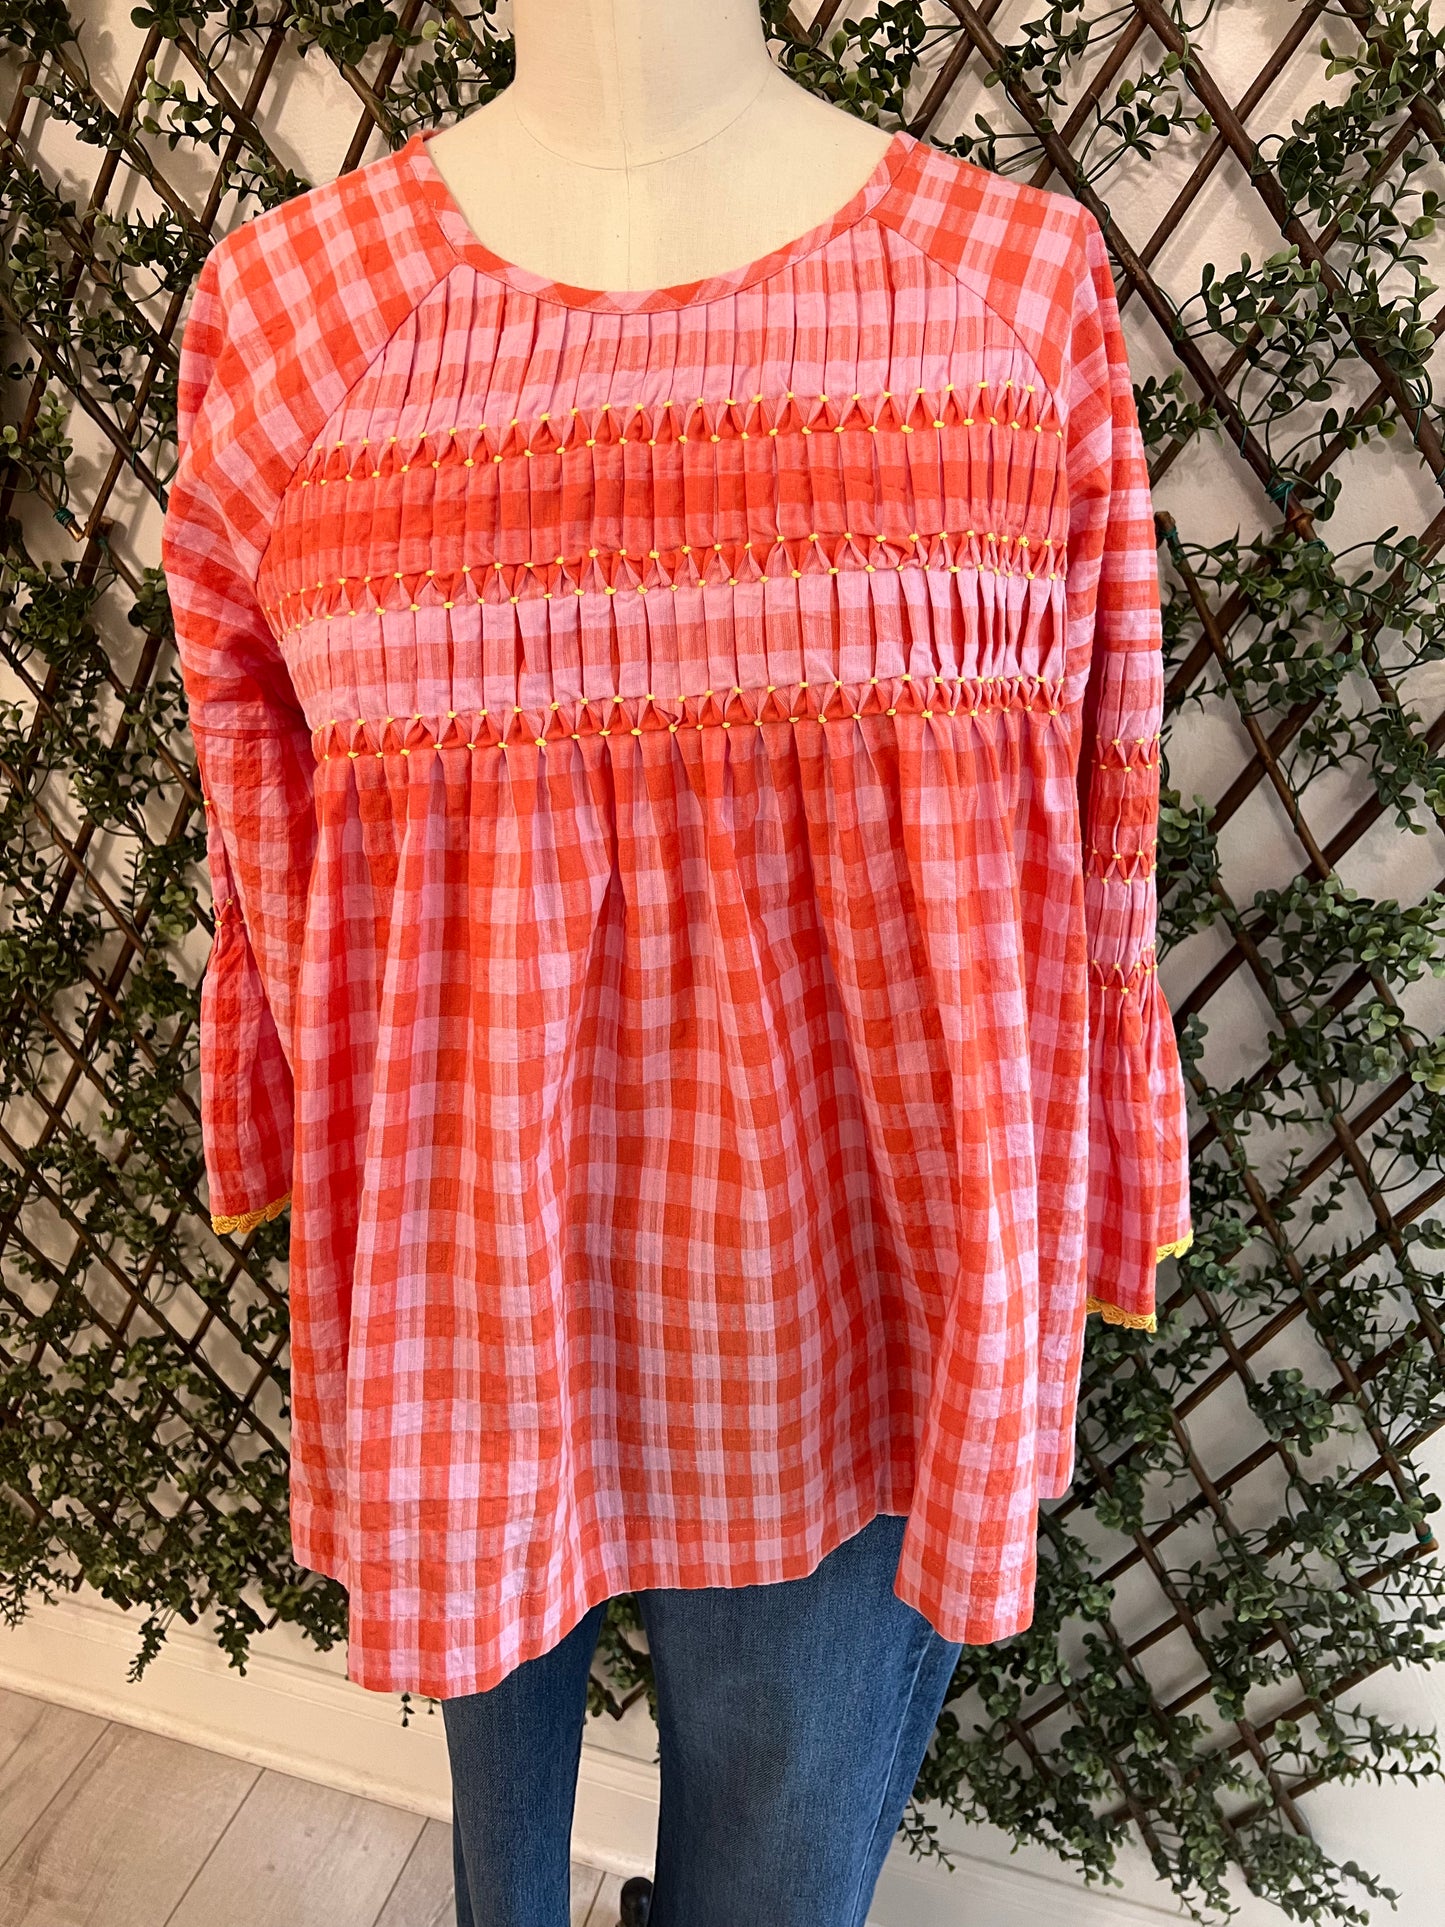 Ivy Jane/ Checked + Tucked Top/ FINAL SALE